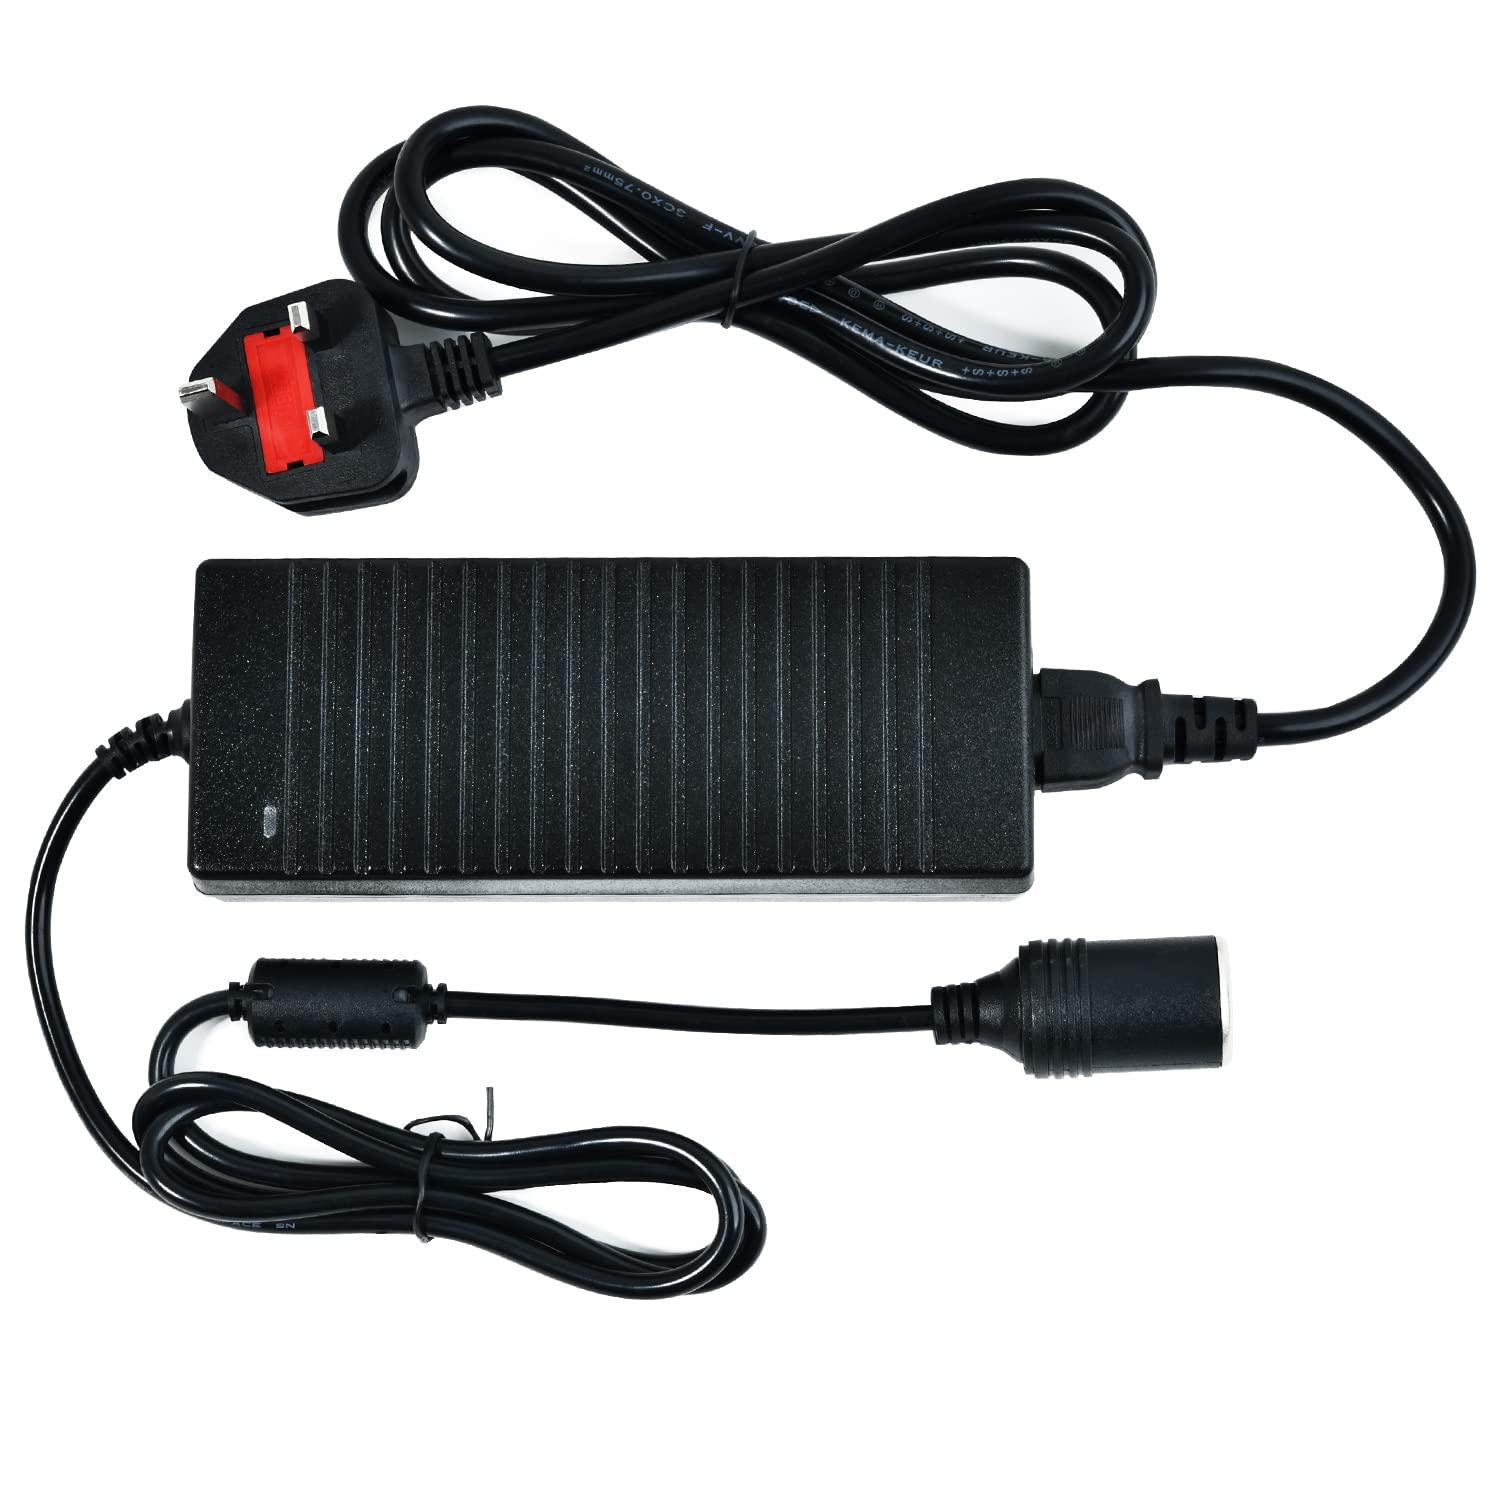 Amacam, Mains Voltage to 12V Converter-AC 240V to DC 12V Transformer with Female Inline Socket Connector Suitable for Cool Boxes Tyre Inflators Vacuum Cleaners and Other Portable Equipment Durable Power Lead.